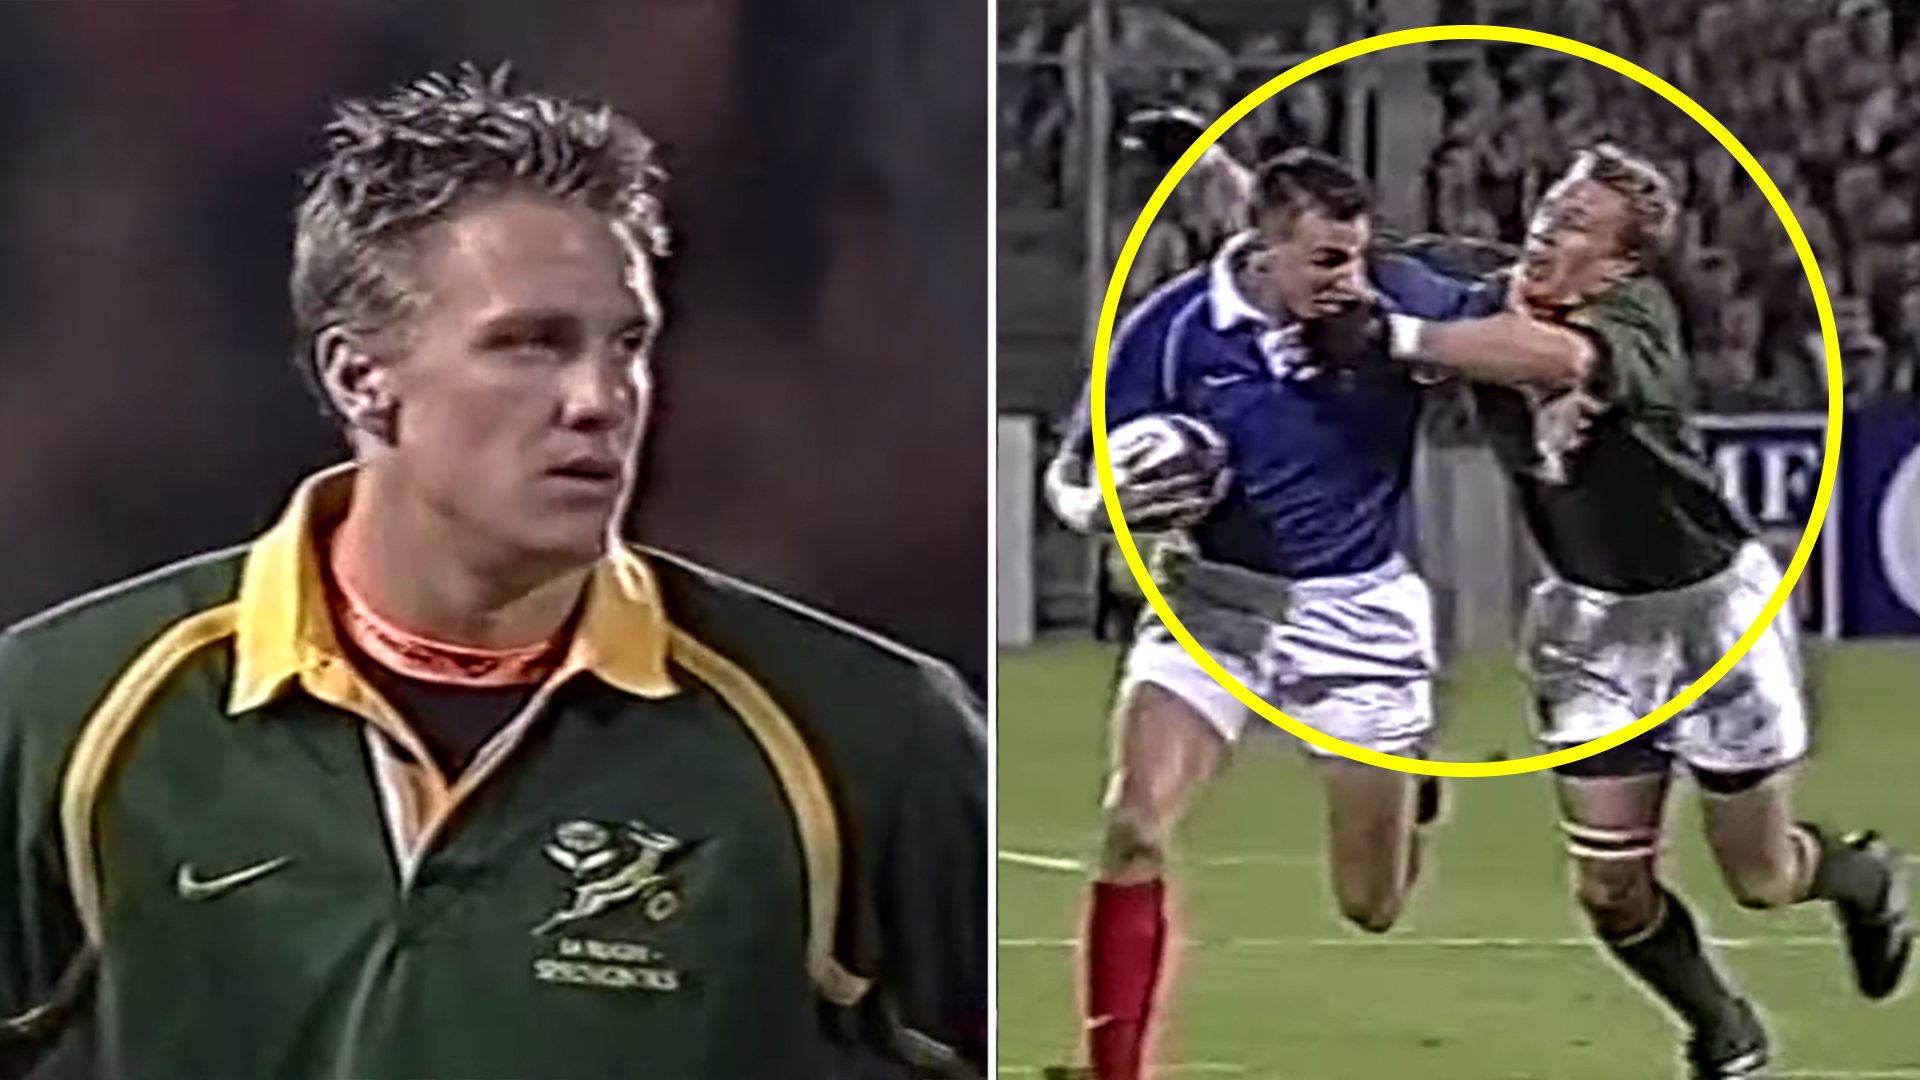 Jean de Villiers' Springboks debut was so bad that it made him the best captain they ever had